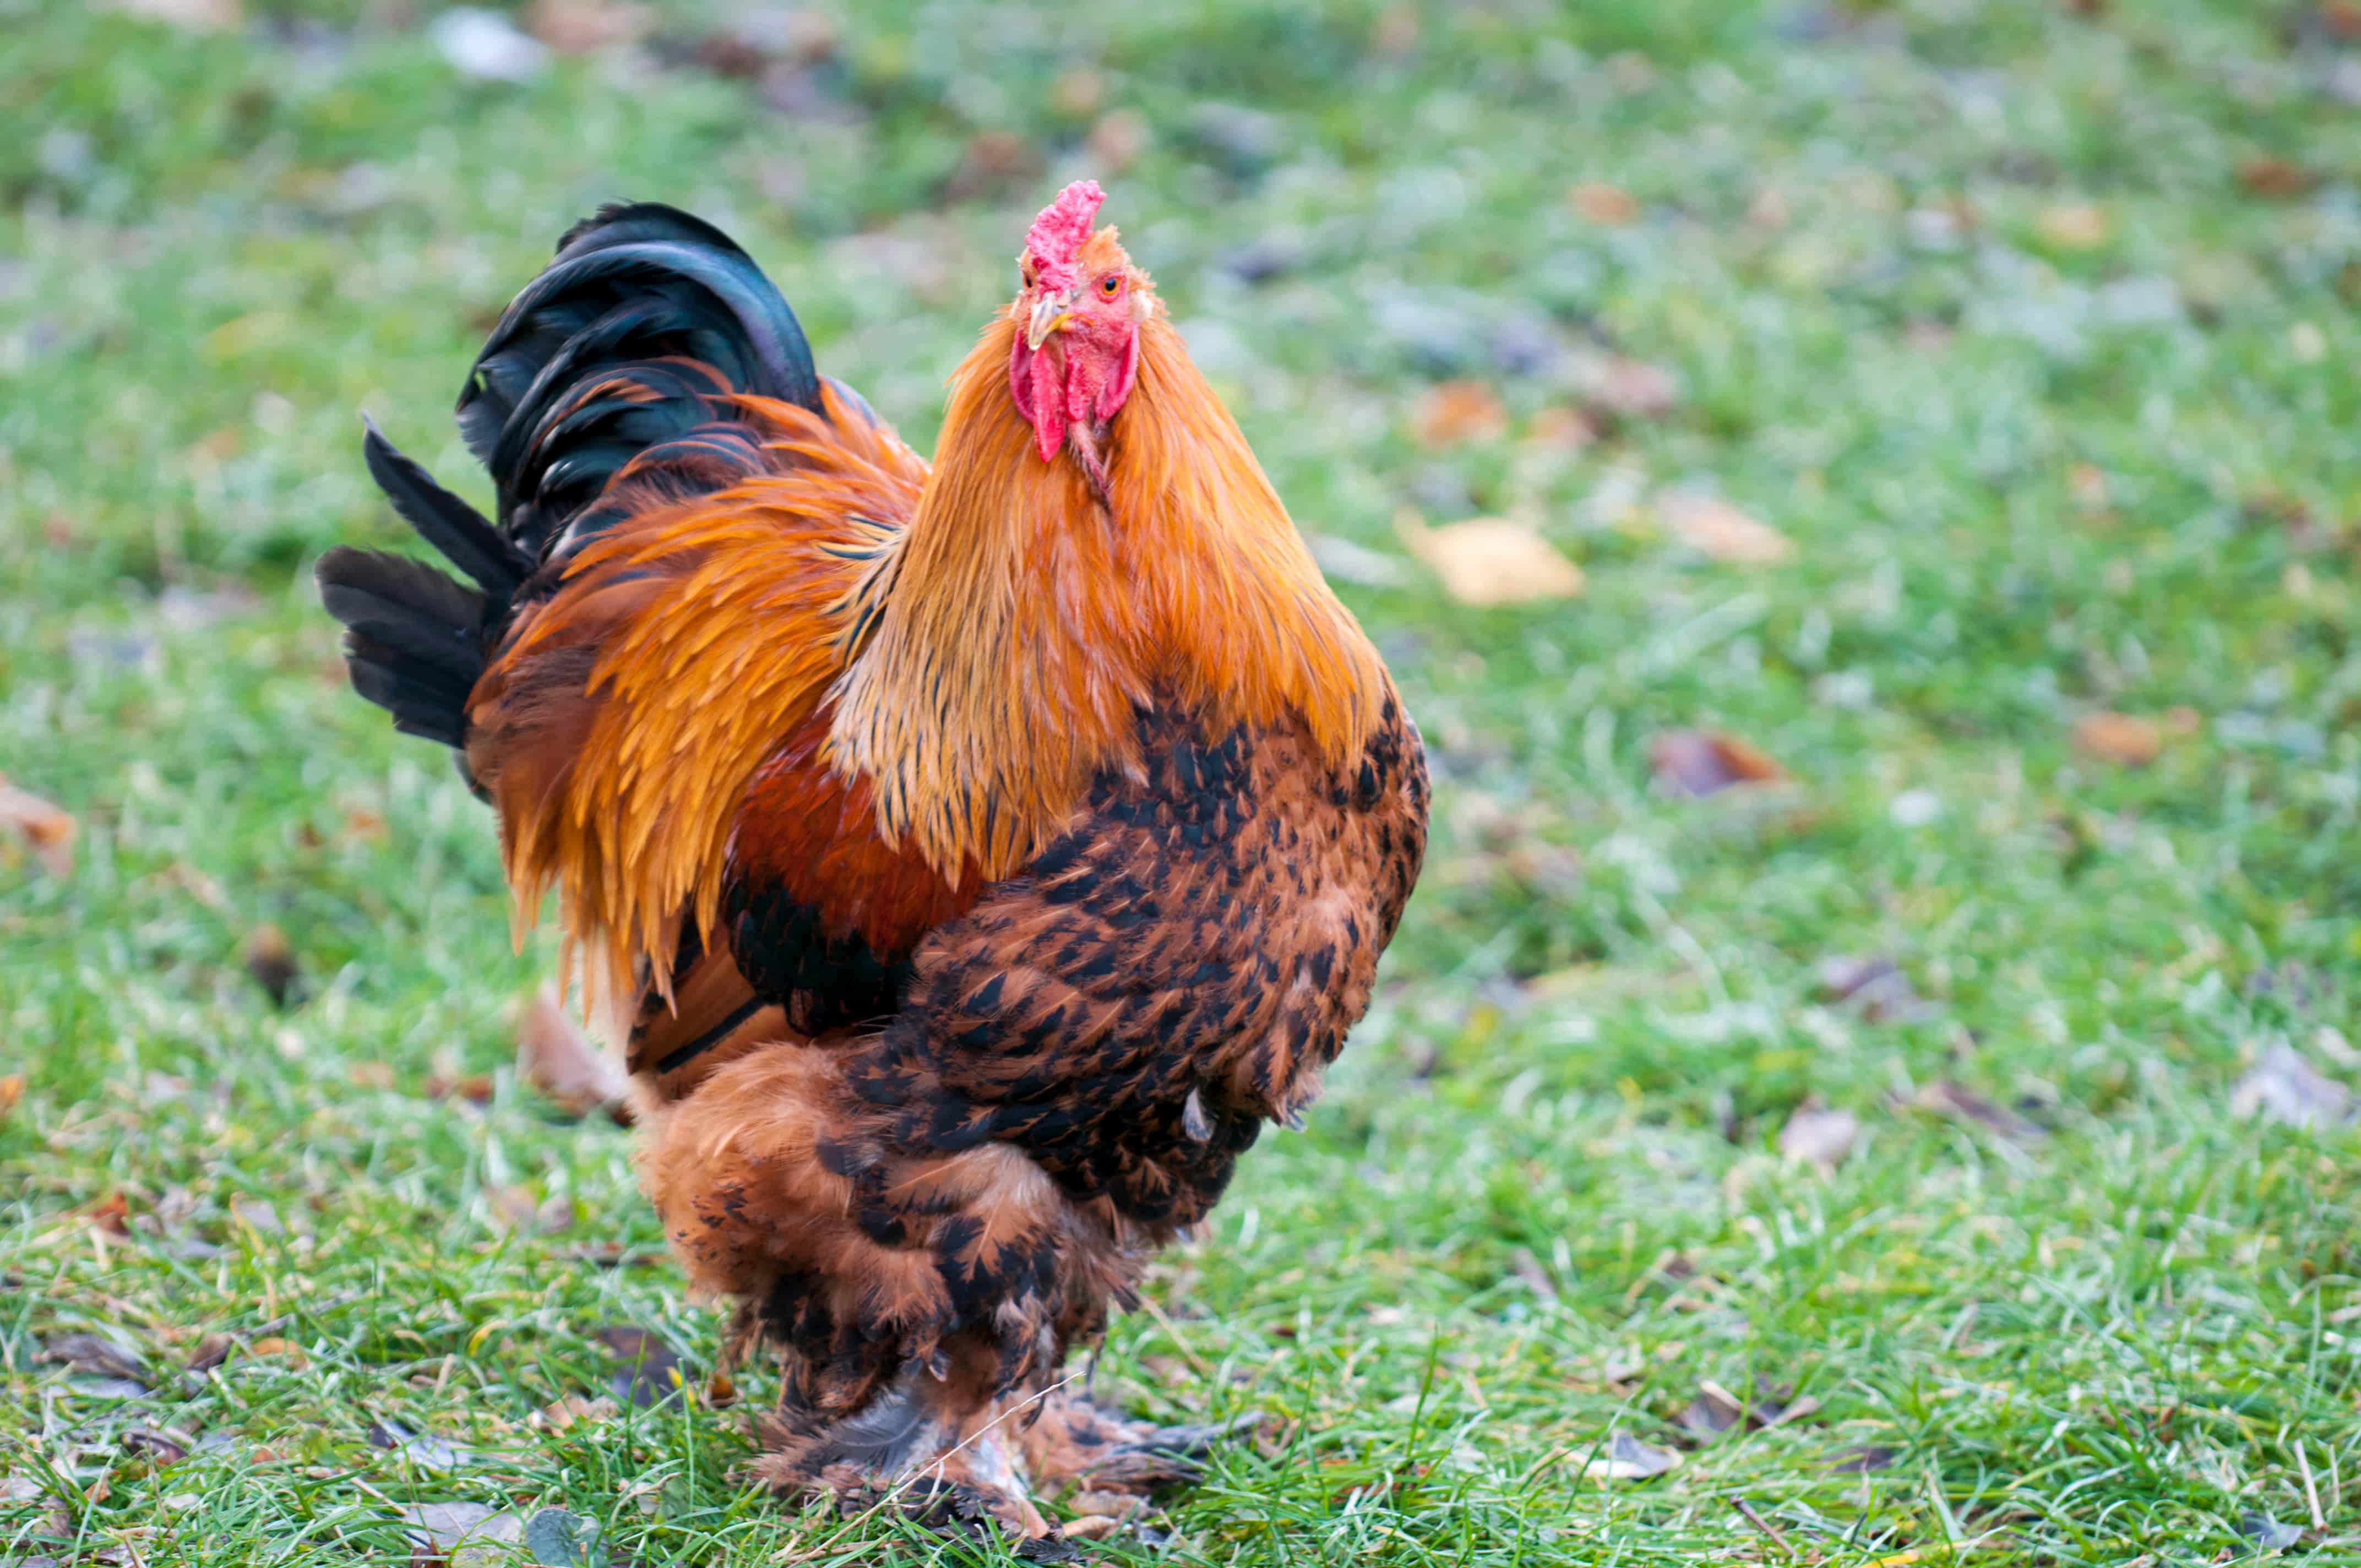 The history and origin of the Brahma chicken. - Cluckin